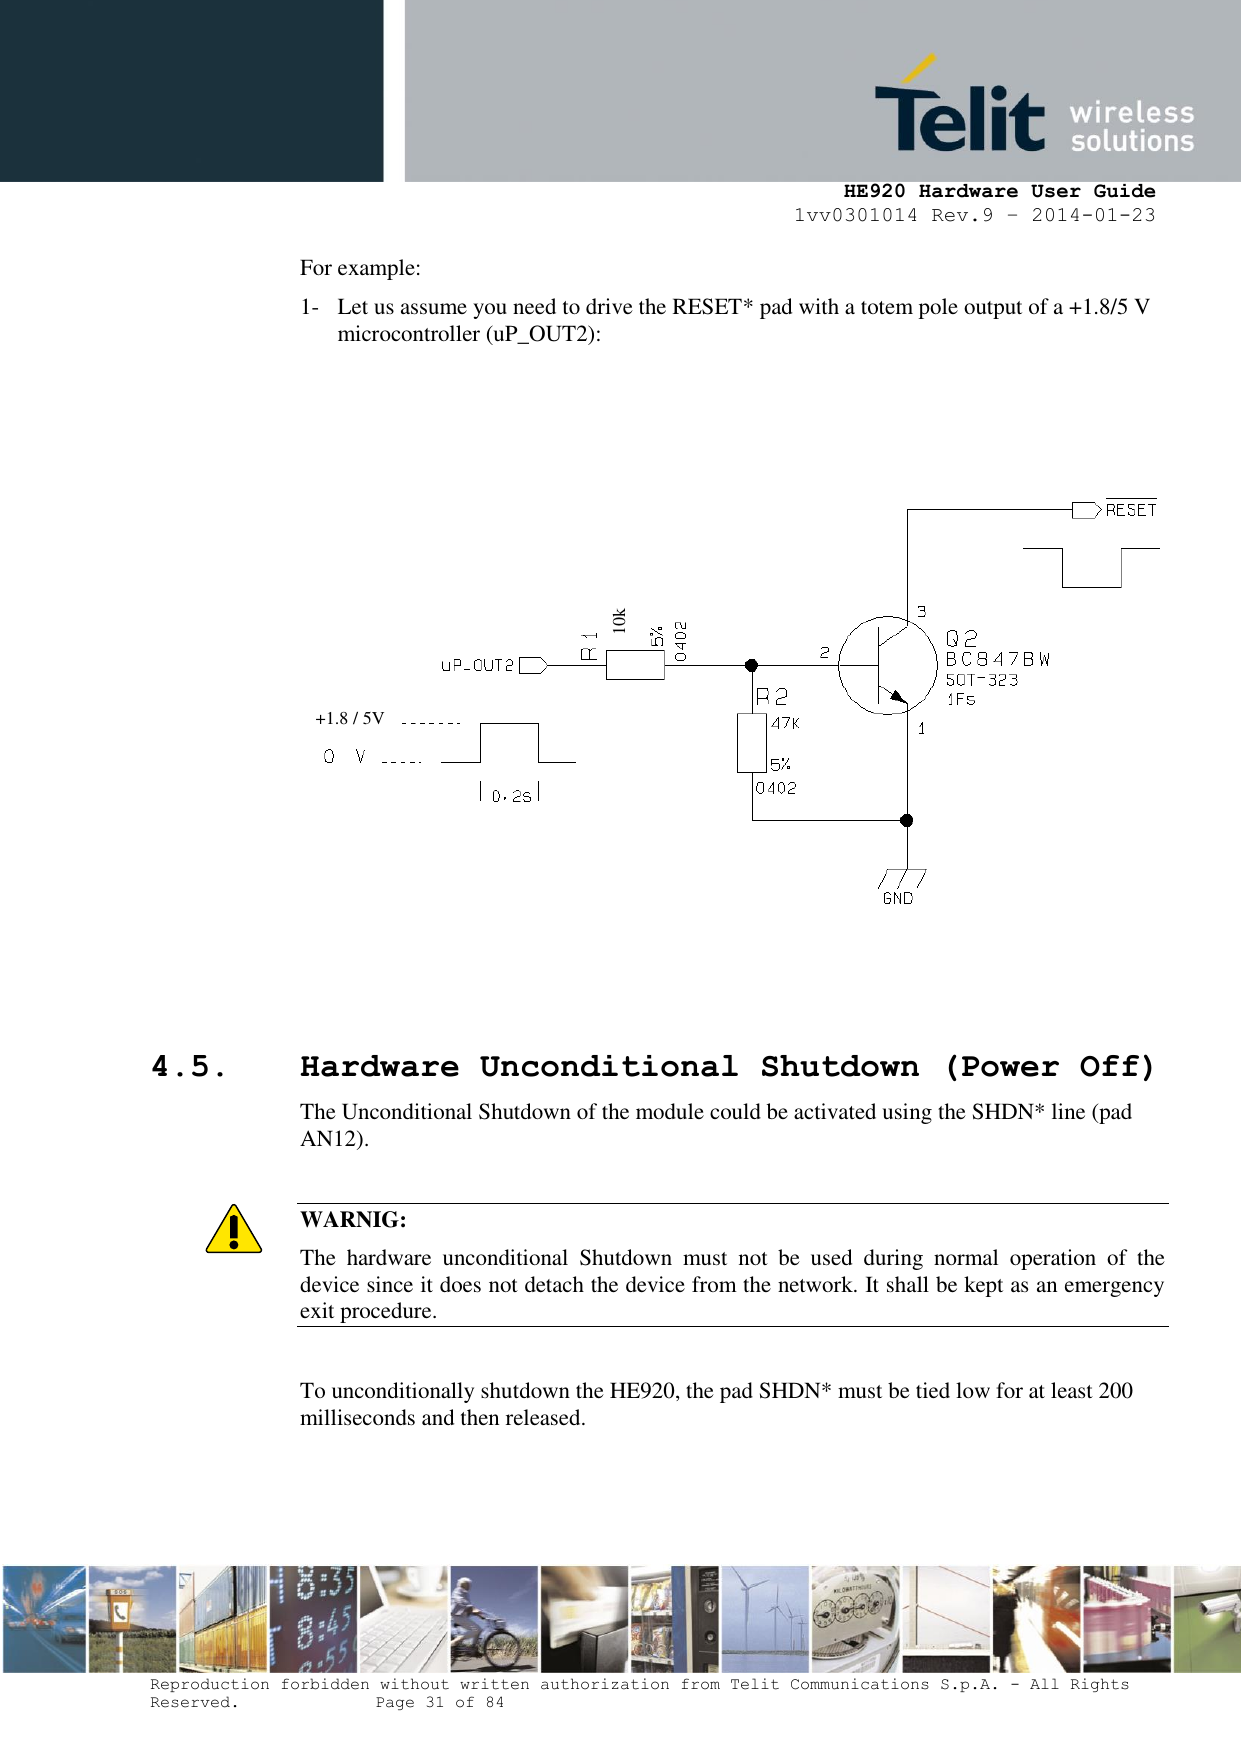     HE920 Hardware User Guide 1vv0301014 Rev.9 – 2014-01-23 Reproduction forbidden without written authorization from Telit Communications S.p.A. - All Rights Reserved.    Page 31 of 84  For example: 1- Let us assume you need to drive the RESET* pad with a totem pole output of a +1.8/5 V microcontroller (uP_OUT2):      4.5. Hardware Unconditional Shutdown (Power Off) The Unconditional Shutdown of the module could be activated using the SHDN* line (pad AN12).  WARNIG: The  hardware  unconditional  Shutdown  must  not  be  used  during  normal  operation  of  the device since it does not detach the device from the network. It shall be kept as an emergency exit procedure.   To unconditionally shutdown the HE920, the pad SHDN* must be tied low for at least 200 milliseconds and then released.    10k +1.8 / 5V 